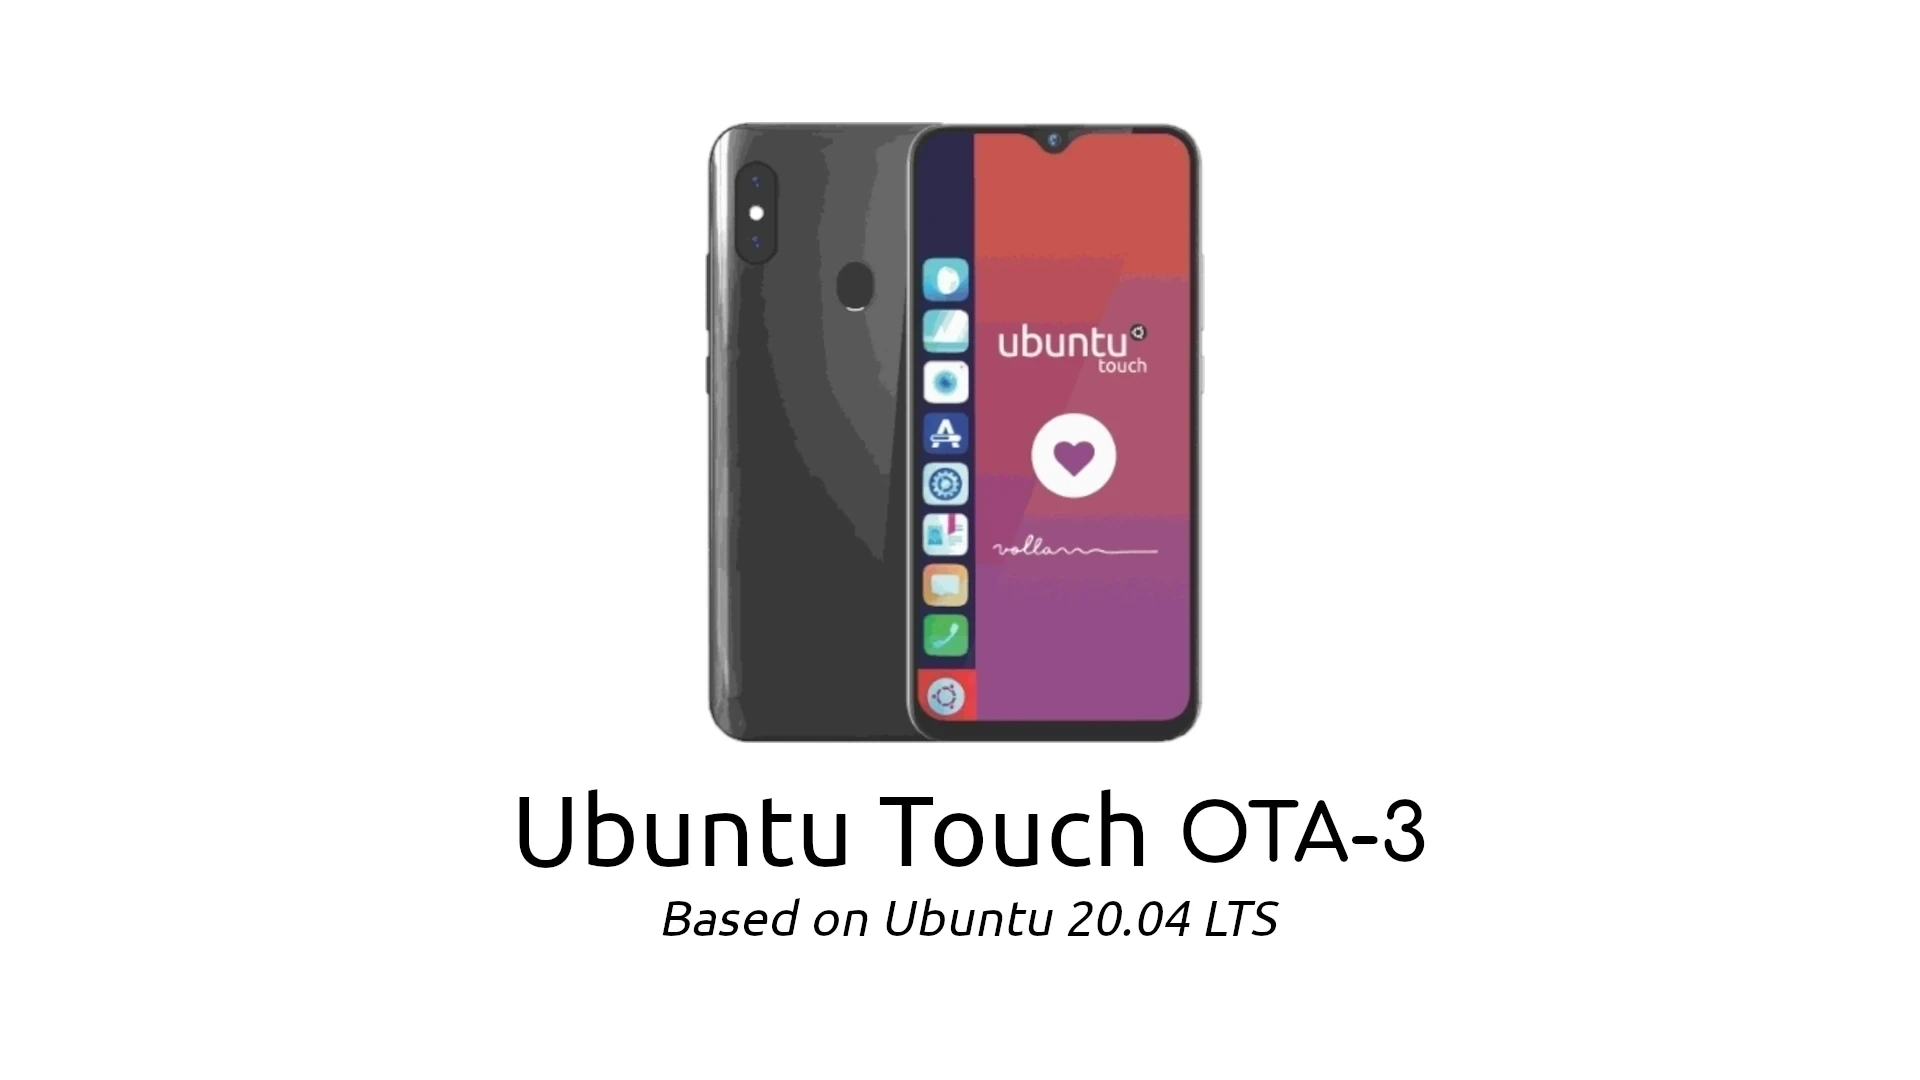 Ubuntu Touch OTA-3 Out Now with OTA Support for PinePhone and PineTab Devices